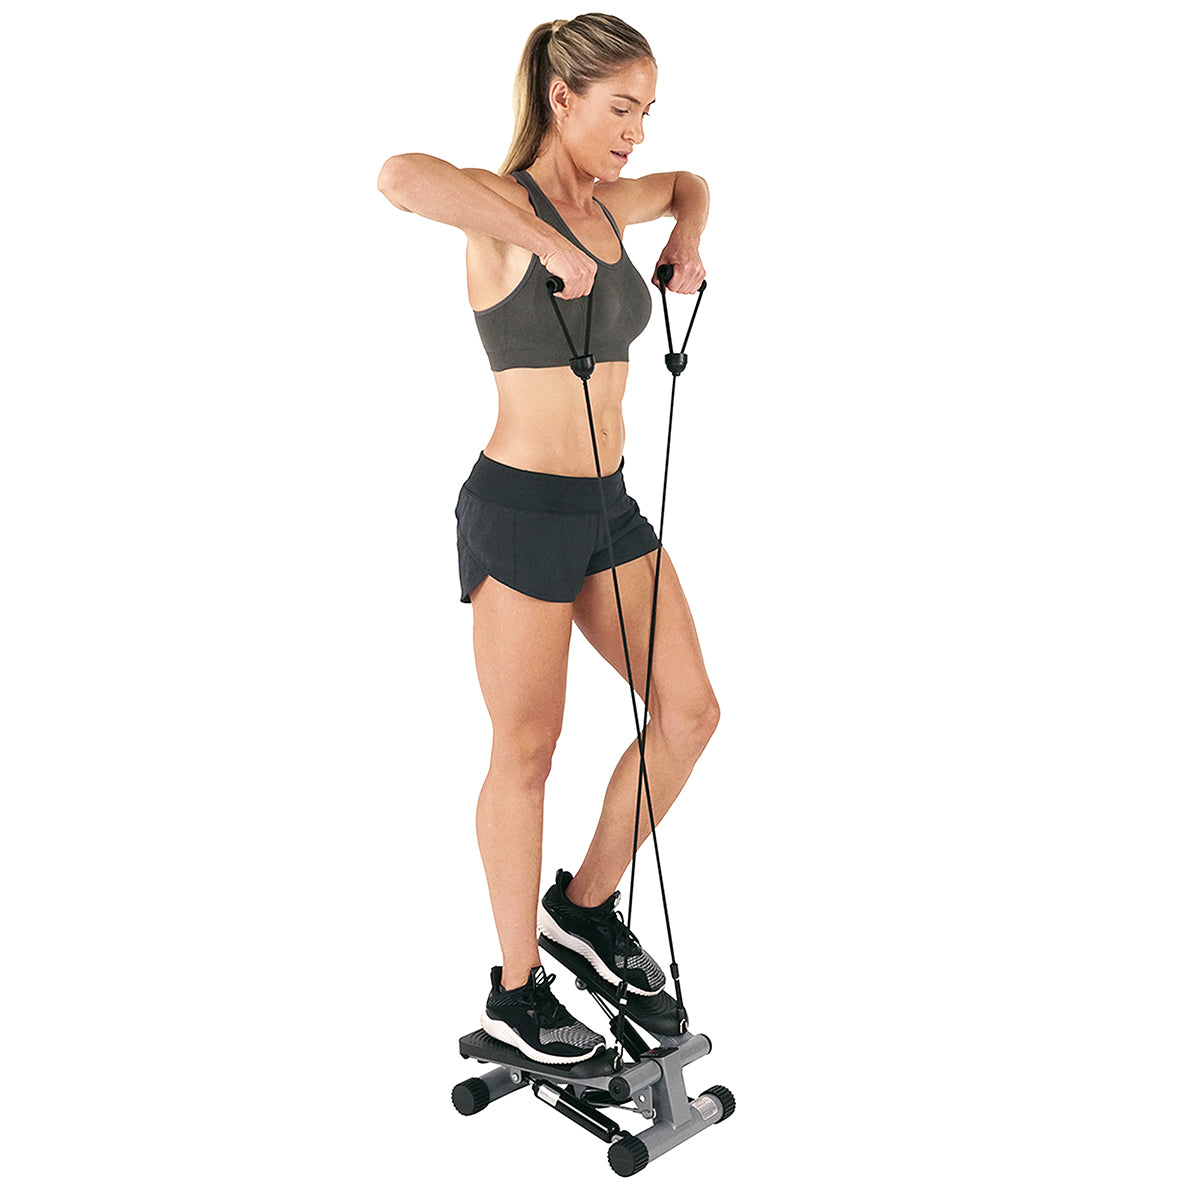 Mini-Stepper Swing Stepper Mini Stepper,Fitness Stair Stepper - Portable  Twist Stair Stepper,Fitness Exercise Machine Durable & LCD Display and